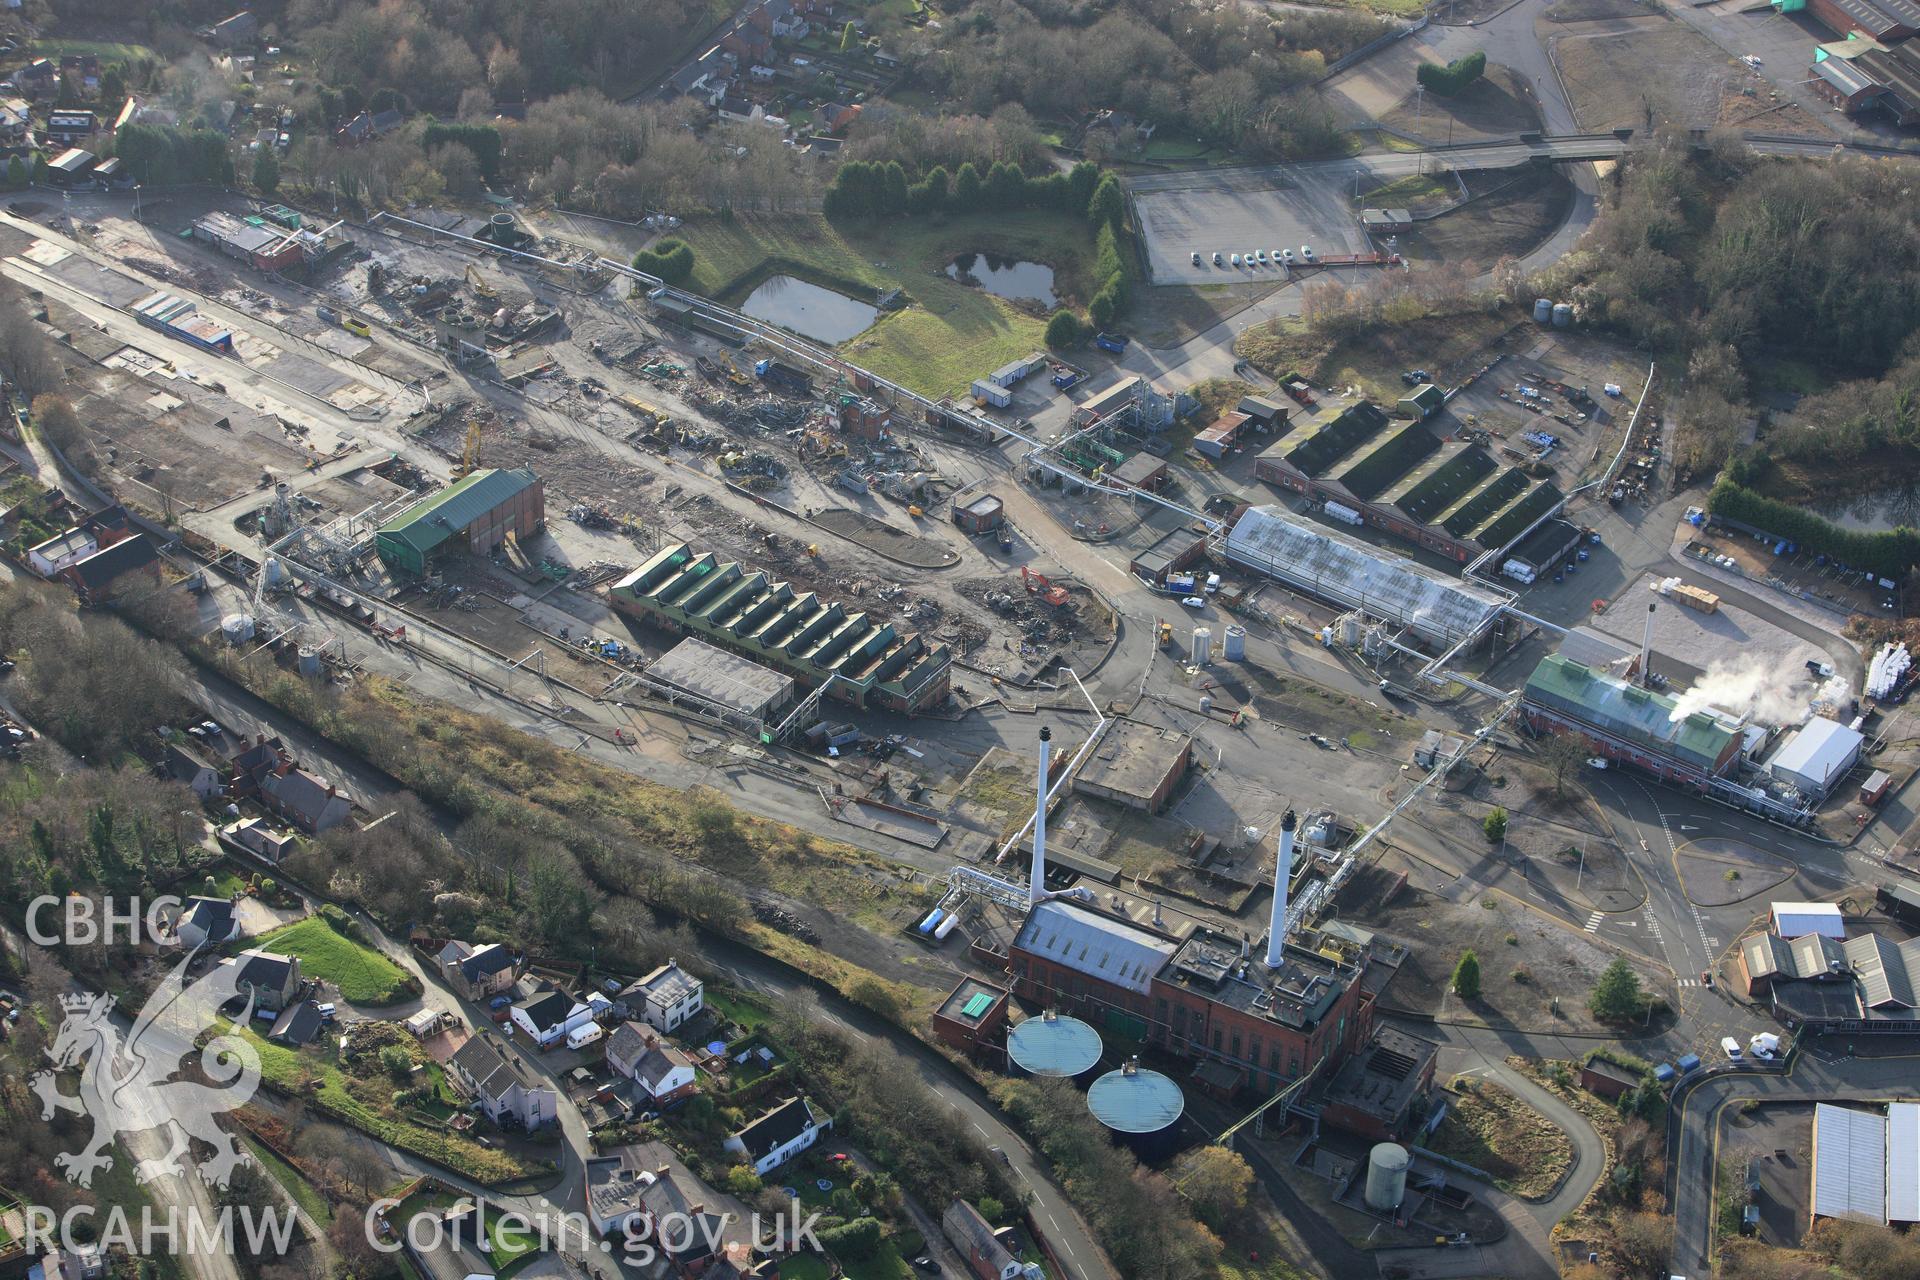 RCAHMW colour oblique aerial photograph of Monsanto Chemical Works, Ruabon, under demolition Taken on 10 December 2009 by Toby Driver